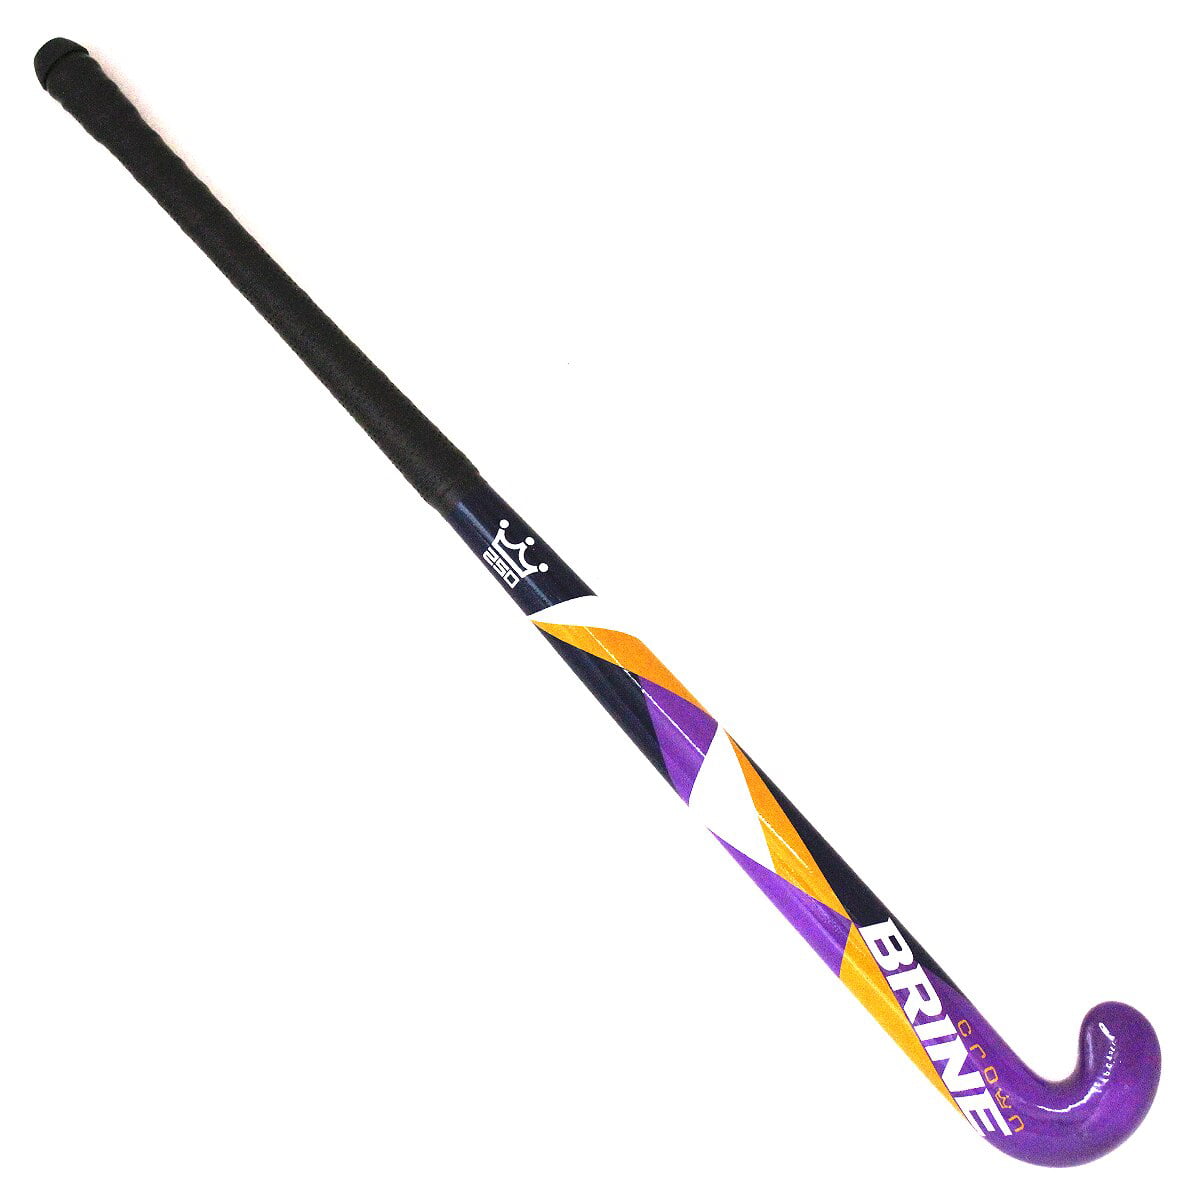 Details about   STX Hammer 500 field hockey stick with free bag and grip christmas sale 37.5 